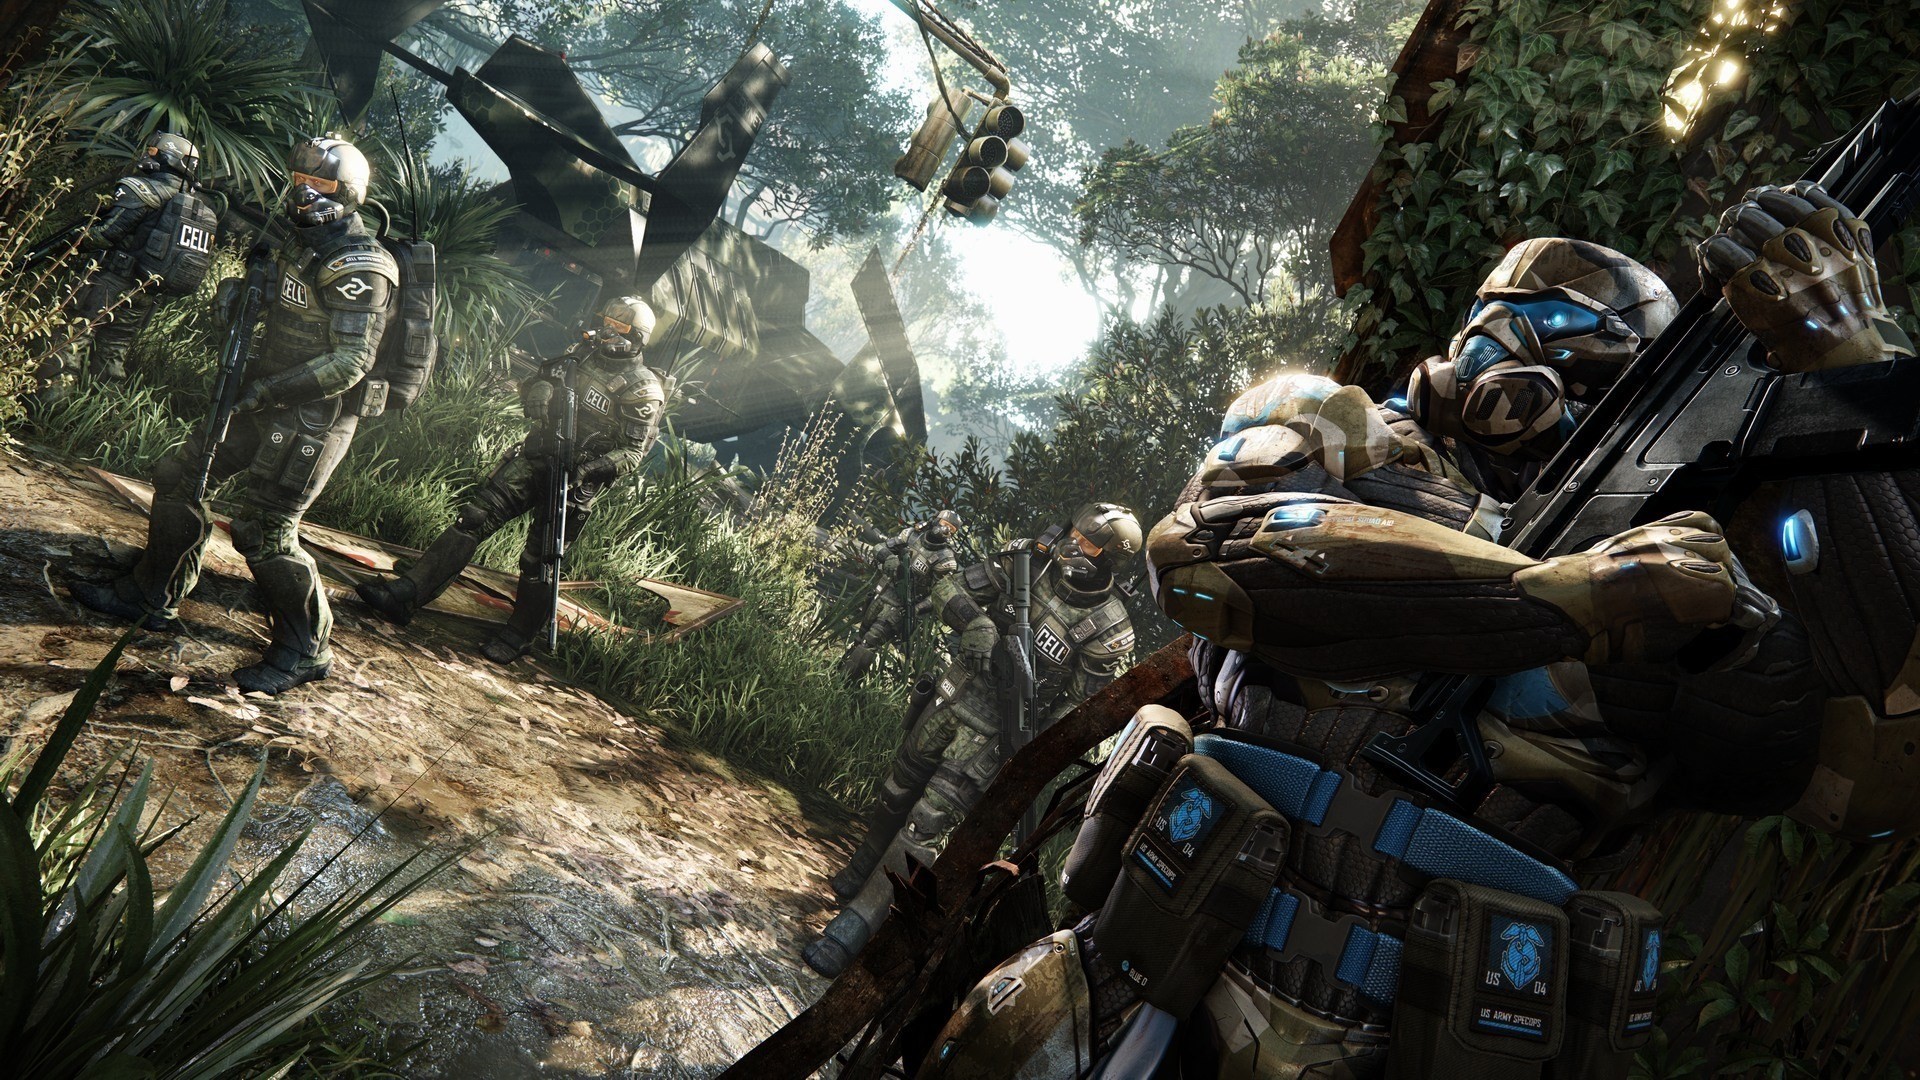 1920x1080  free desktop backgrounds for crysis 3